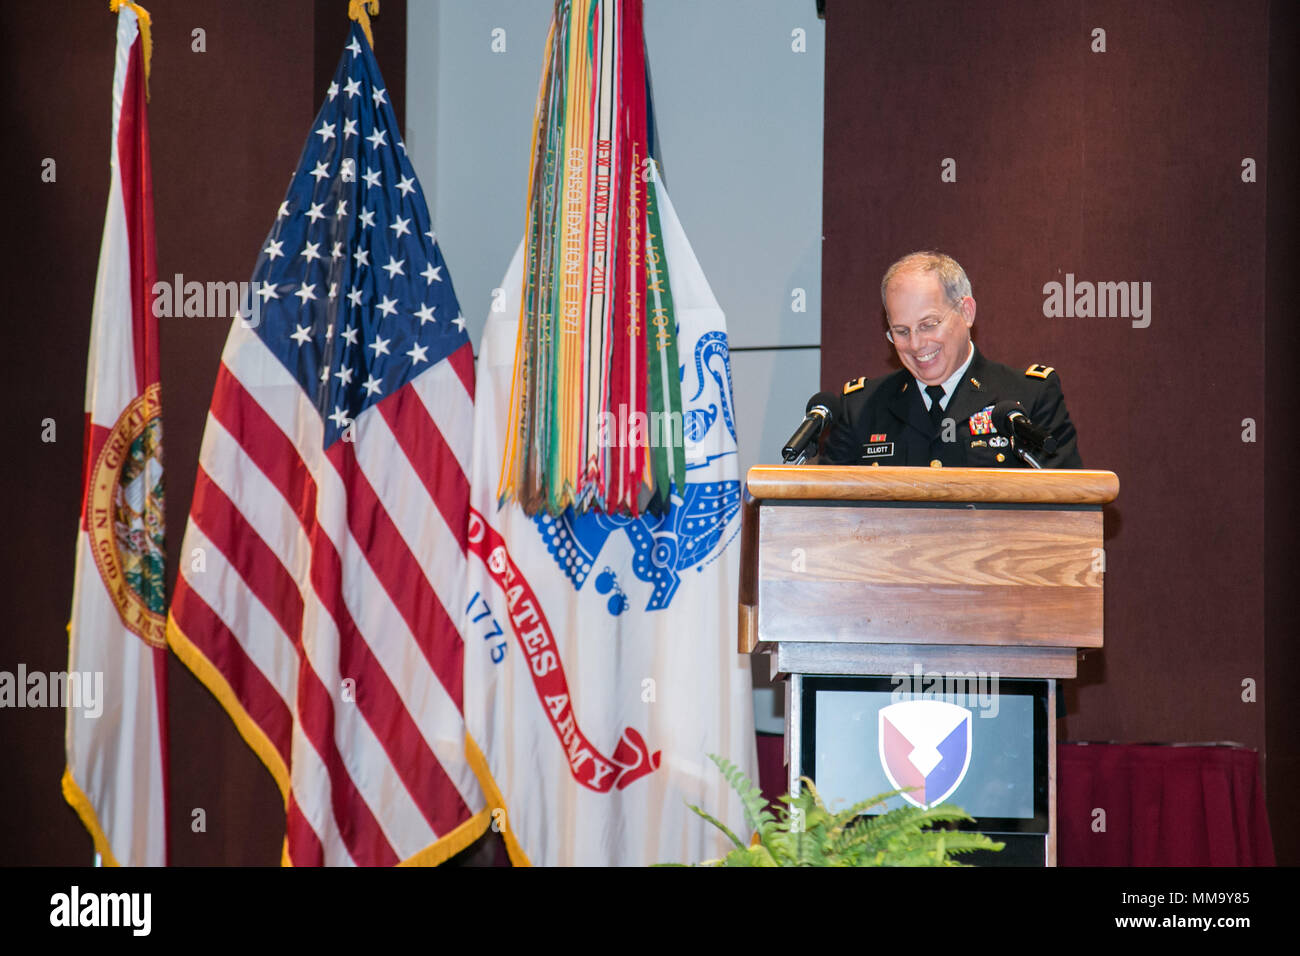 U.S. Army Maj. Gen. Allan Elliott, Chief of Staff for Army Materiel Command, introduces the keynote speaker Mrs. Christine Chavez, during the Hispanic-American Heritage Month Observance Sept. 25, 2017 at Redstone Arsenal, Alabama.  Chavez is the granddaughter of labor leader and civil rights activist Cesar Chavez.  (U.S. Army photo by Sgt. 1st Class Teddy Wade) Stock Photo